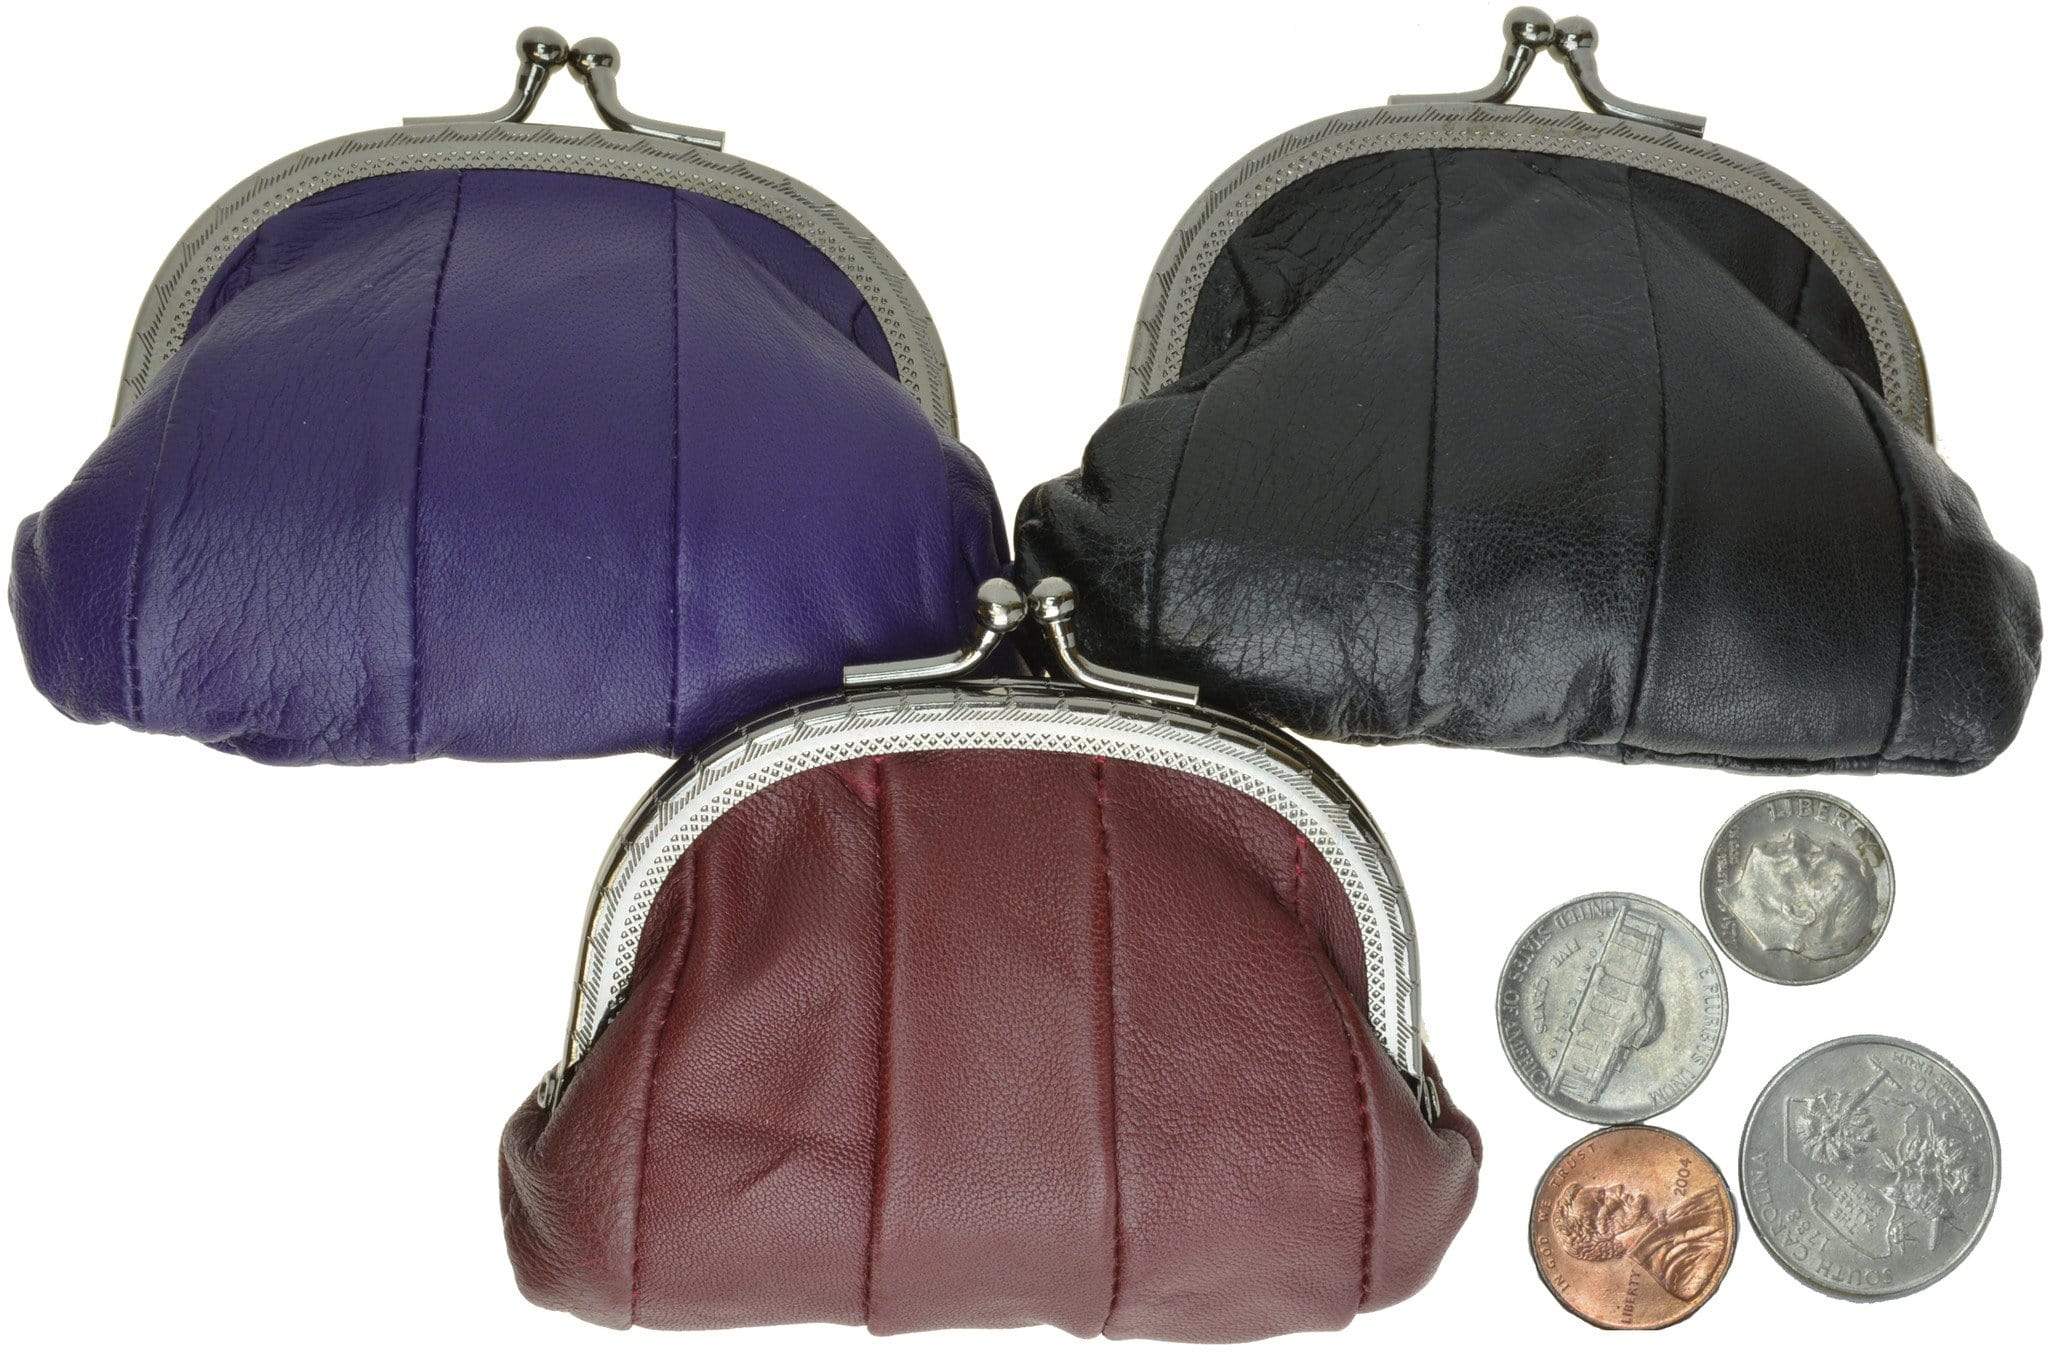 Zakka Workshop Classic Coin Purse With Silver Clasp Kit | Michaels